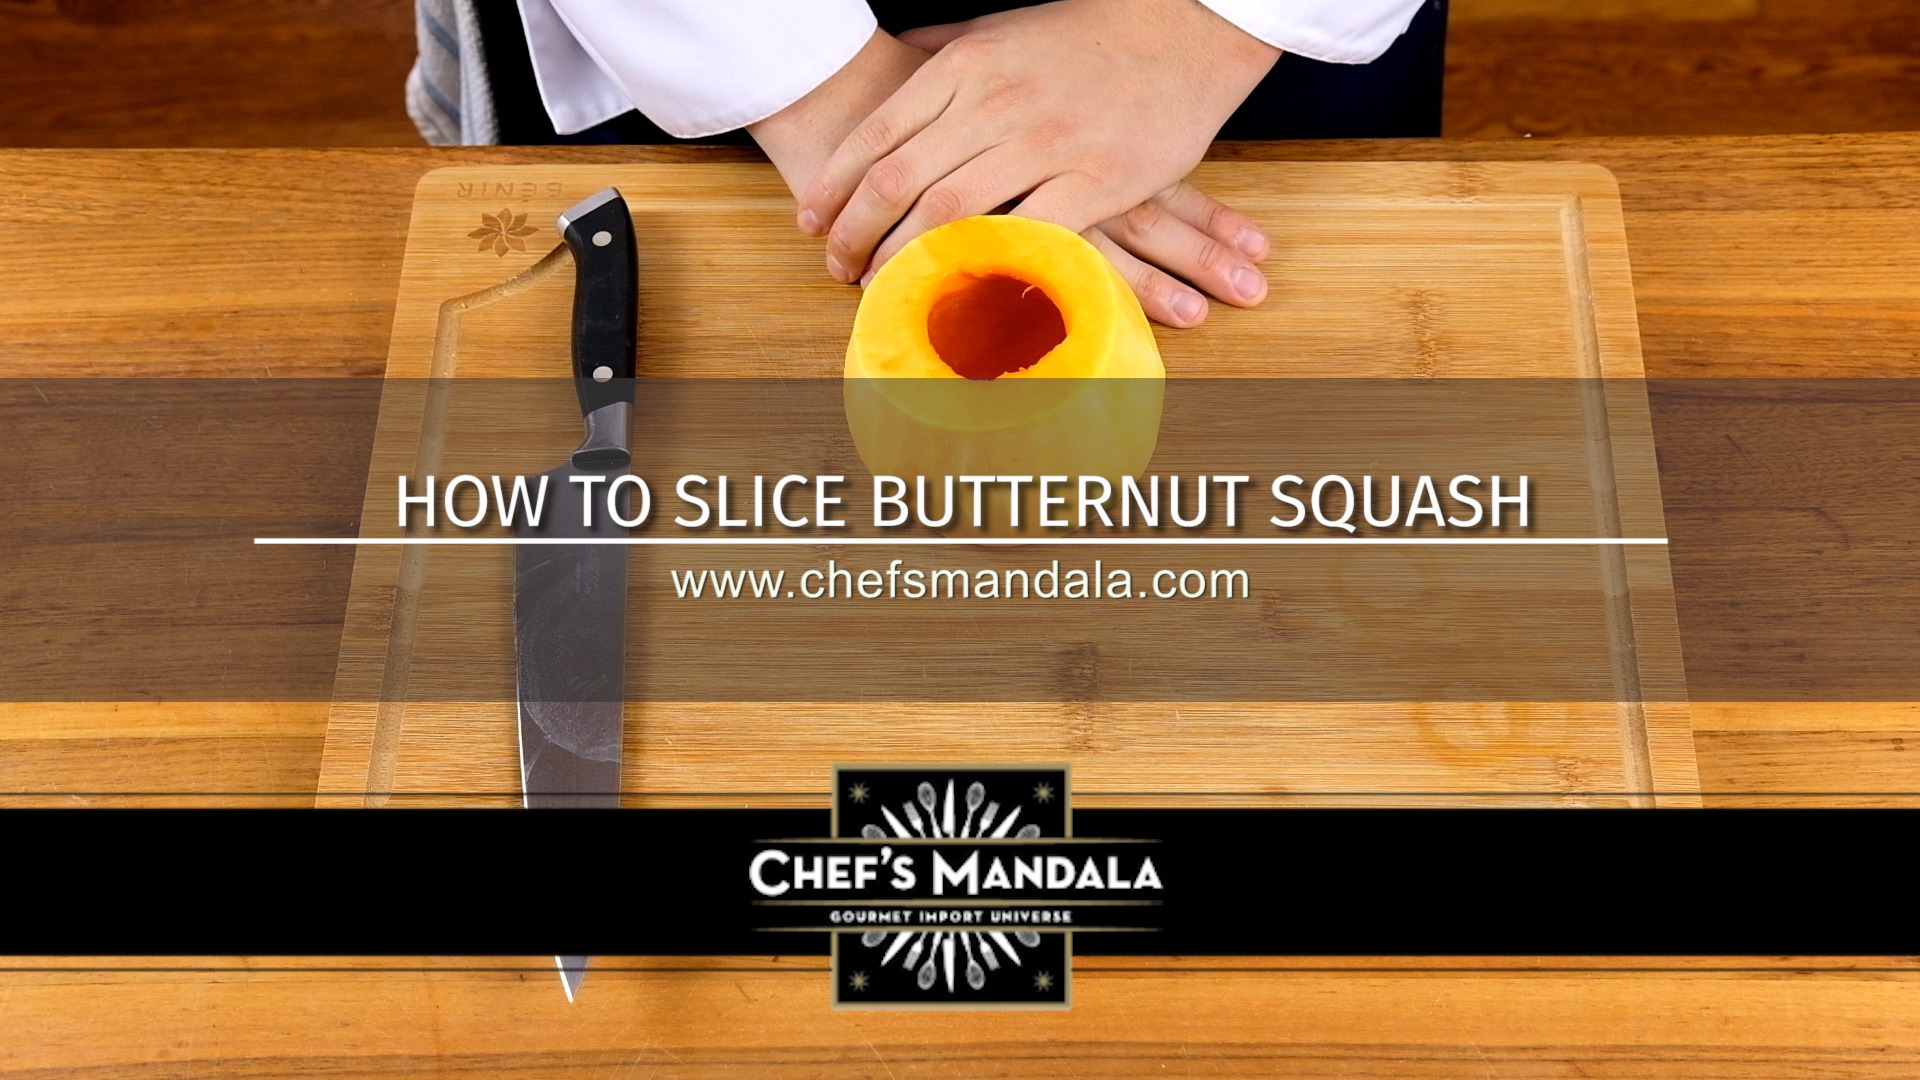 HOW TO SLICE BUTTERNUT SQUASH